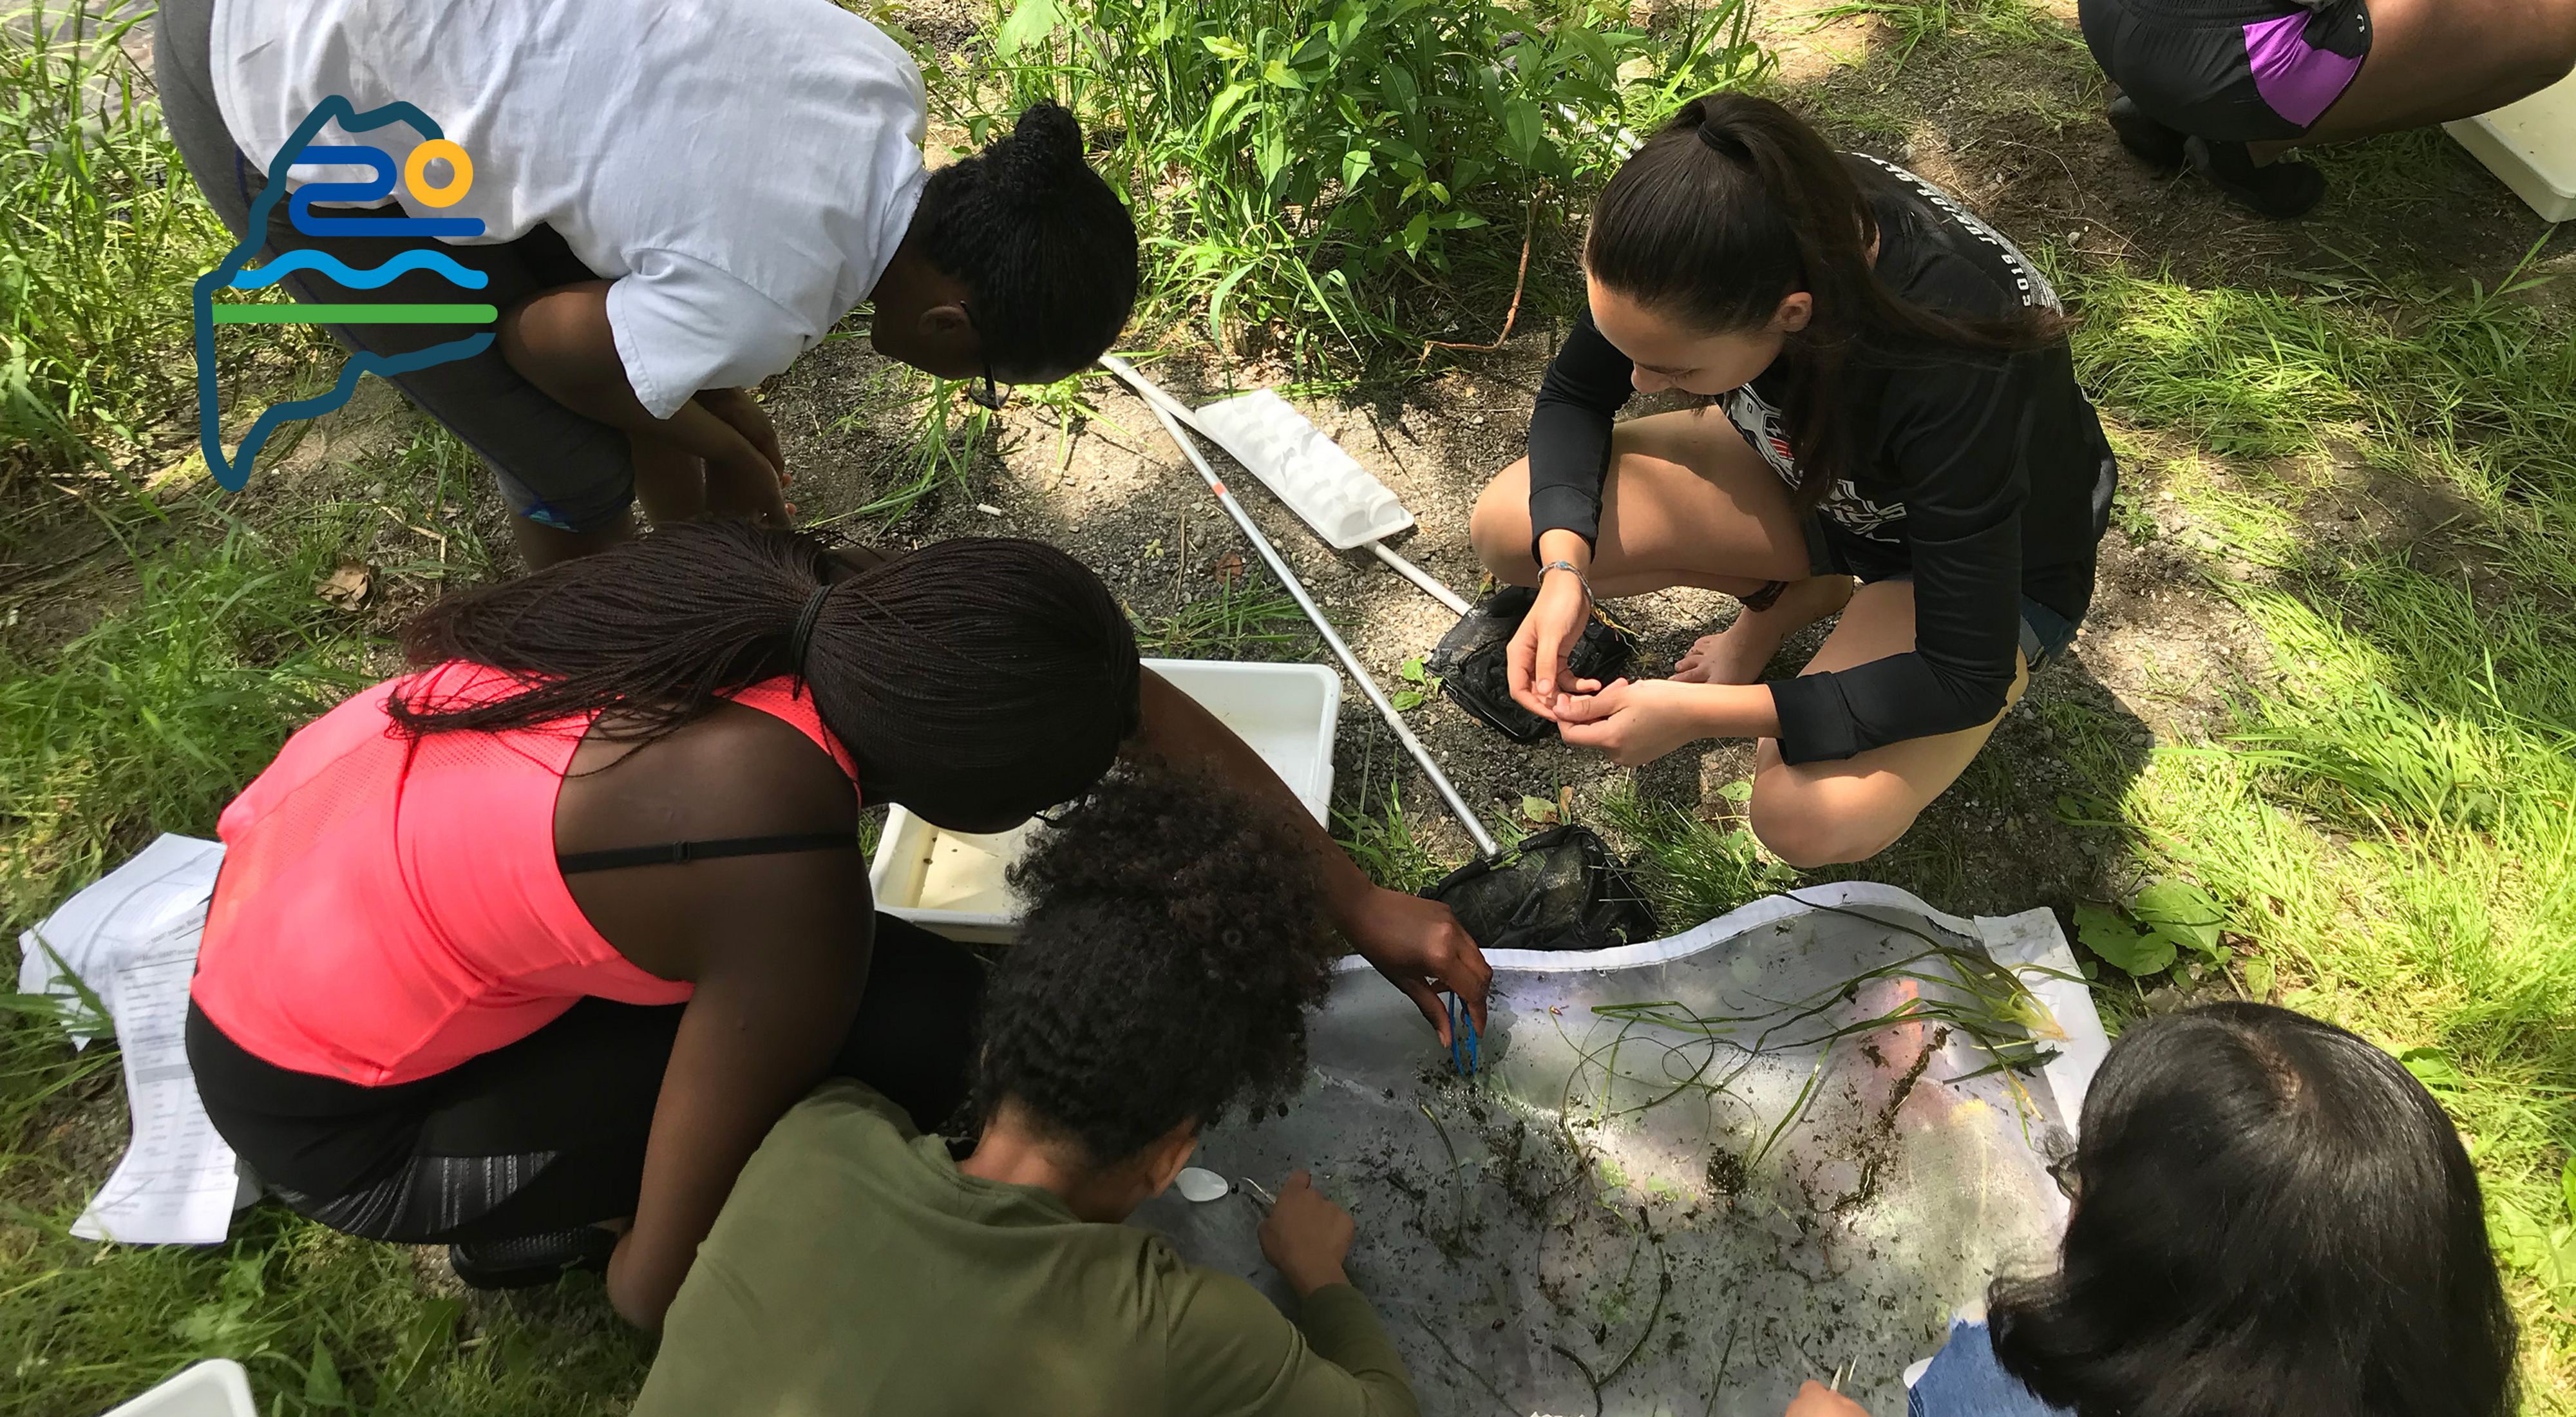 Overhead view of four young people looking at species in a tray on the ground.